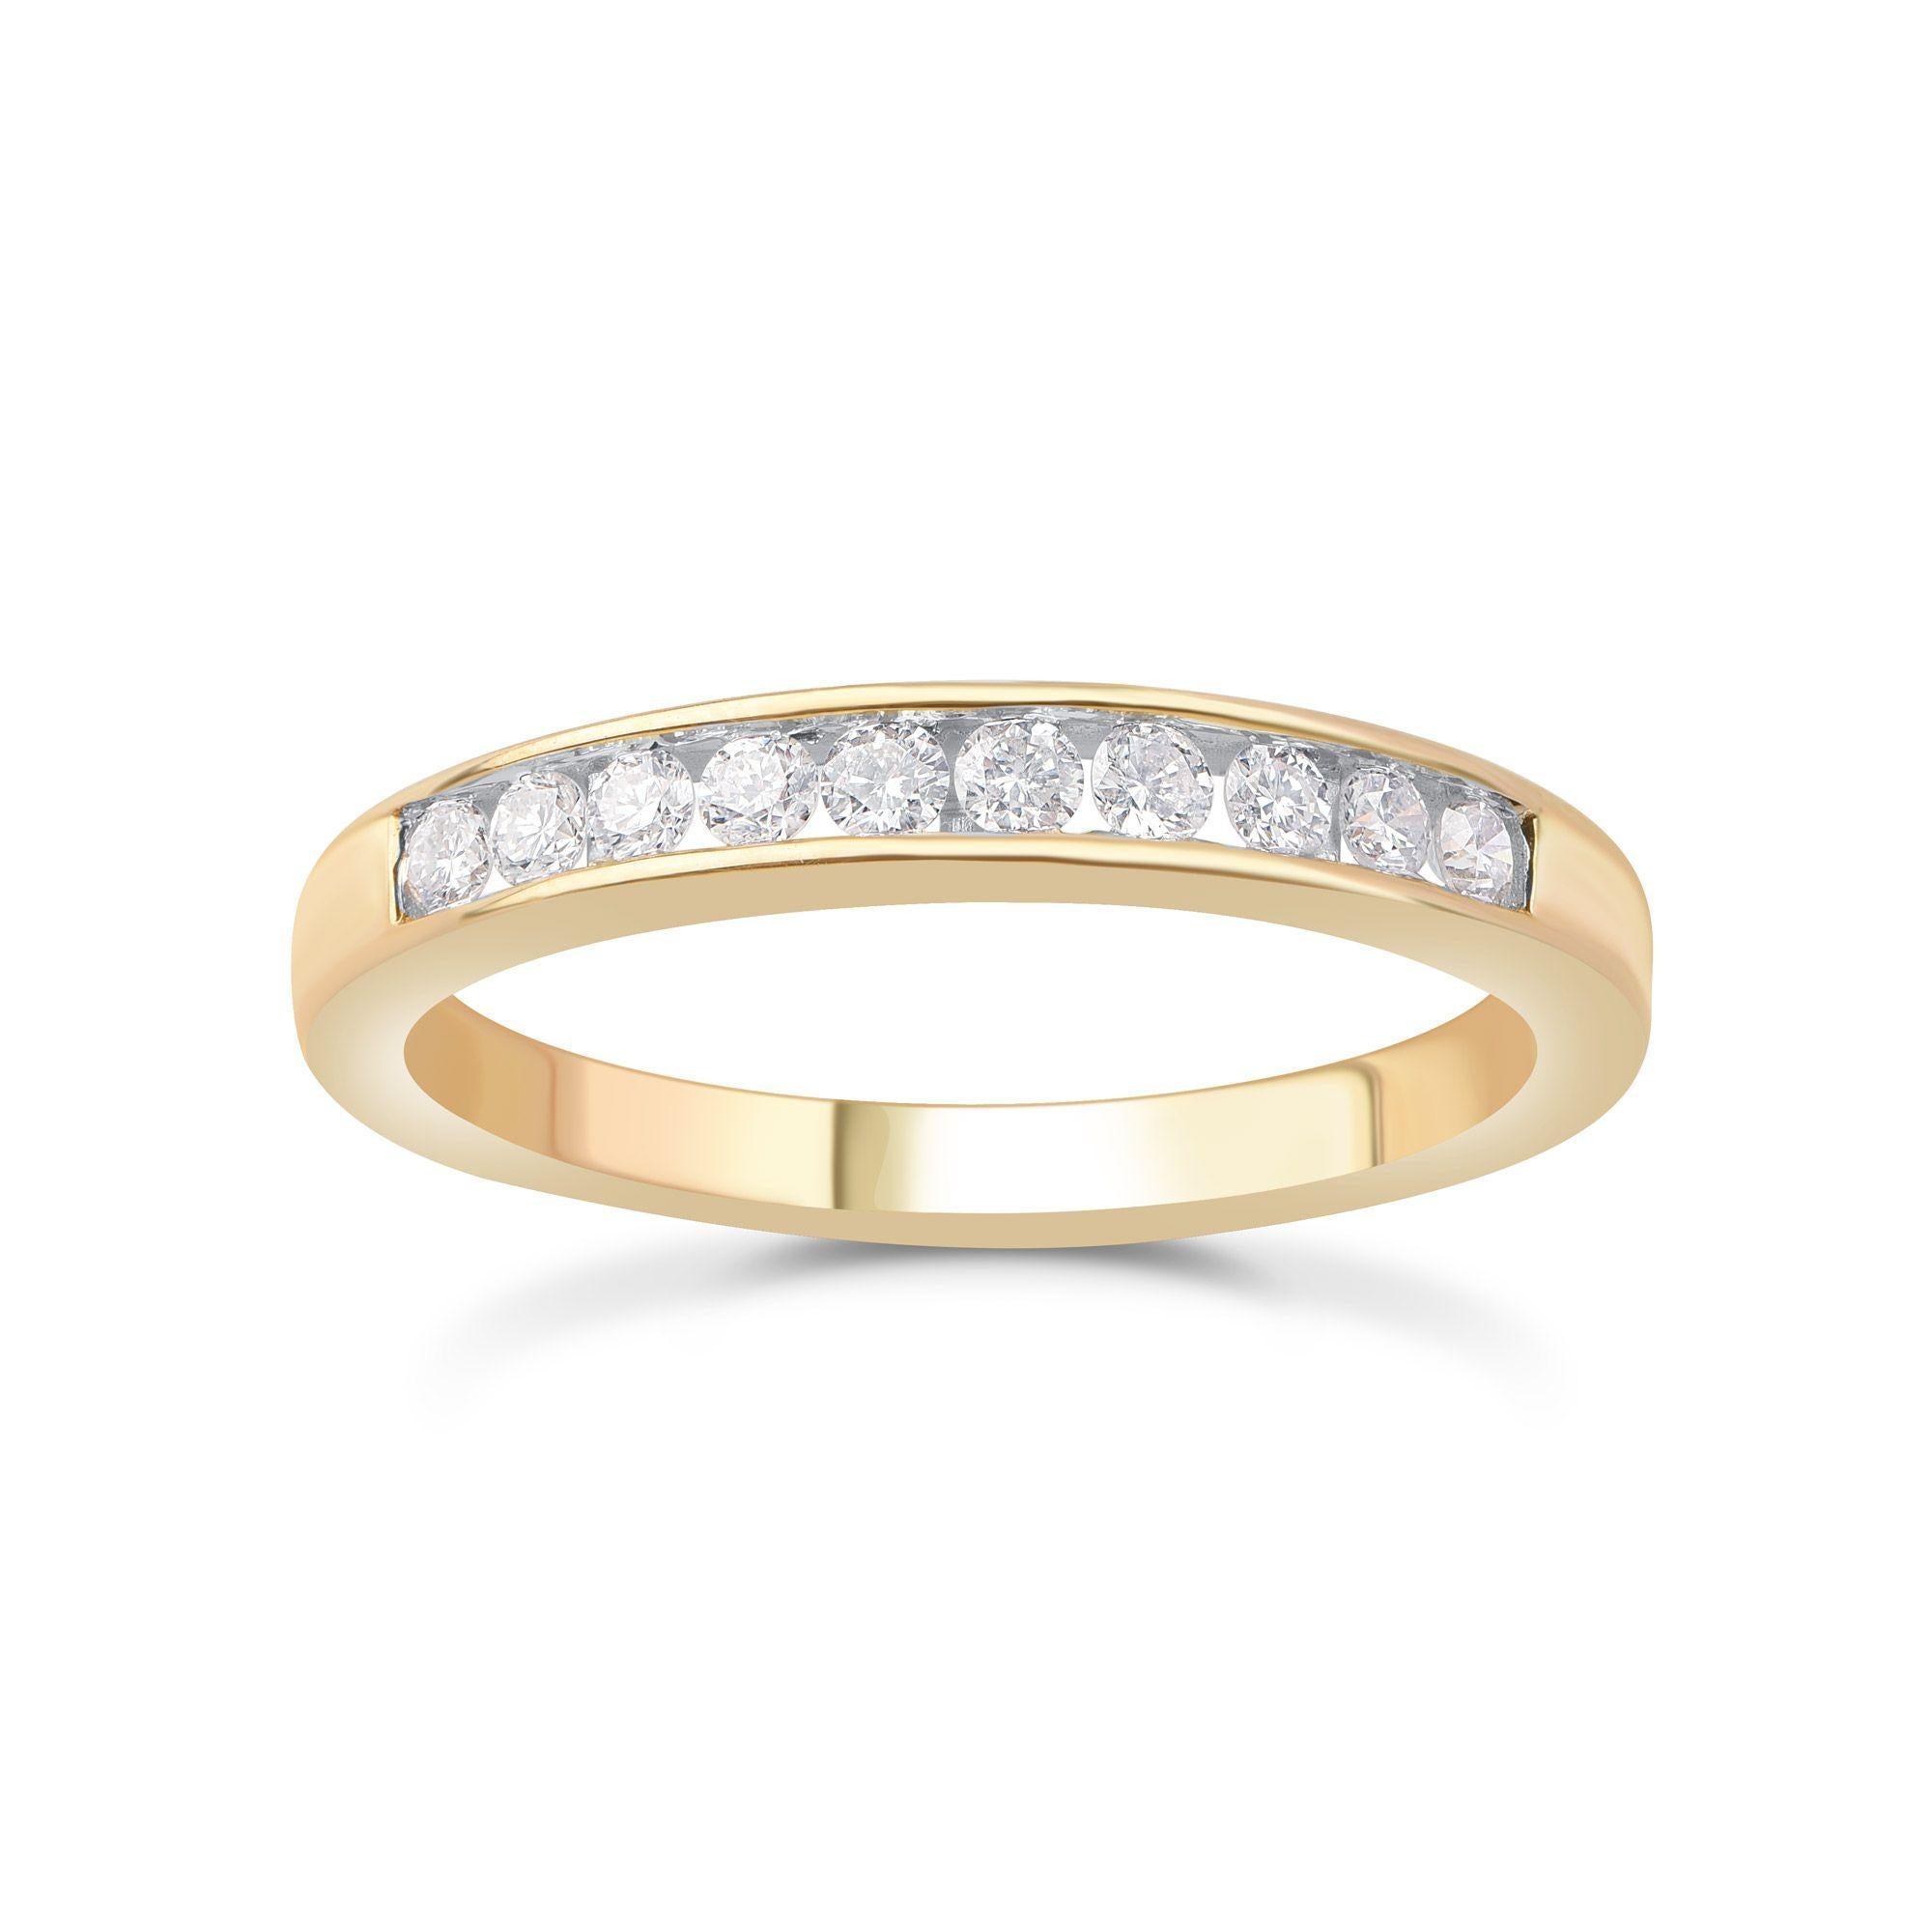 This simple and sleek bridal ring studded with diamonds is a great accompaniment with your everyday attire. Made in 10 kt yellow gold and 10 round-cut diamonds in channel setting. Diamond details - G-H Color, I1-I2 Clarity. 
